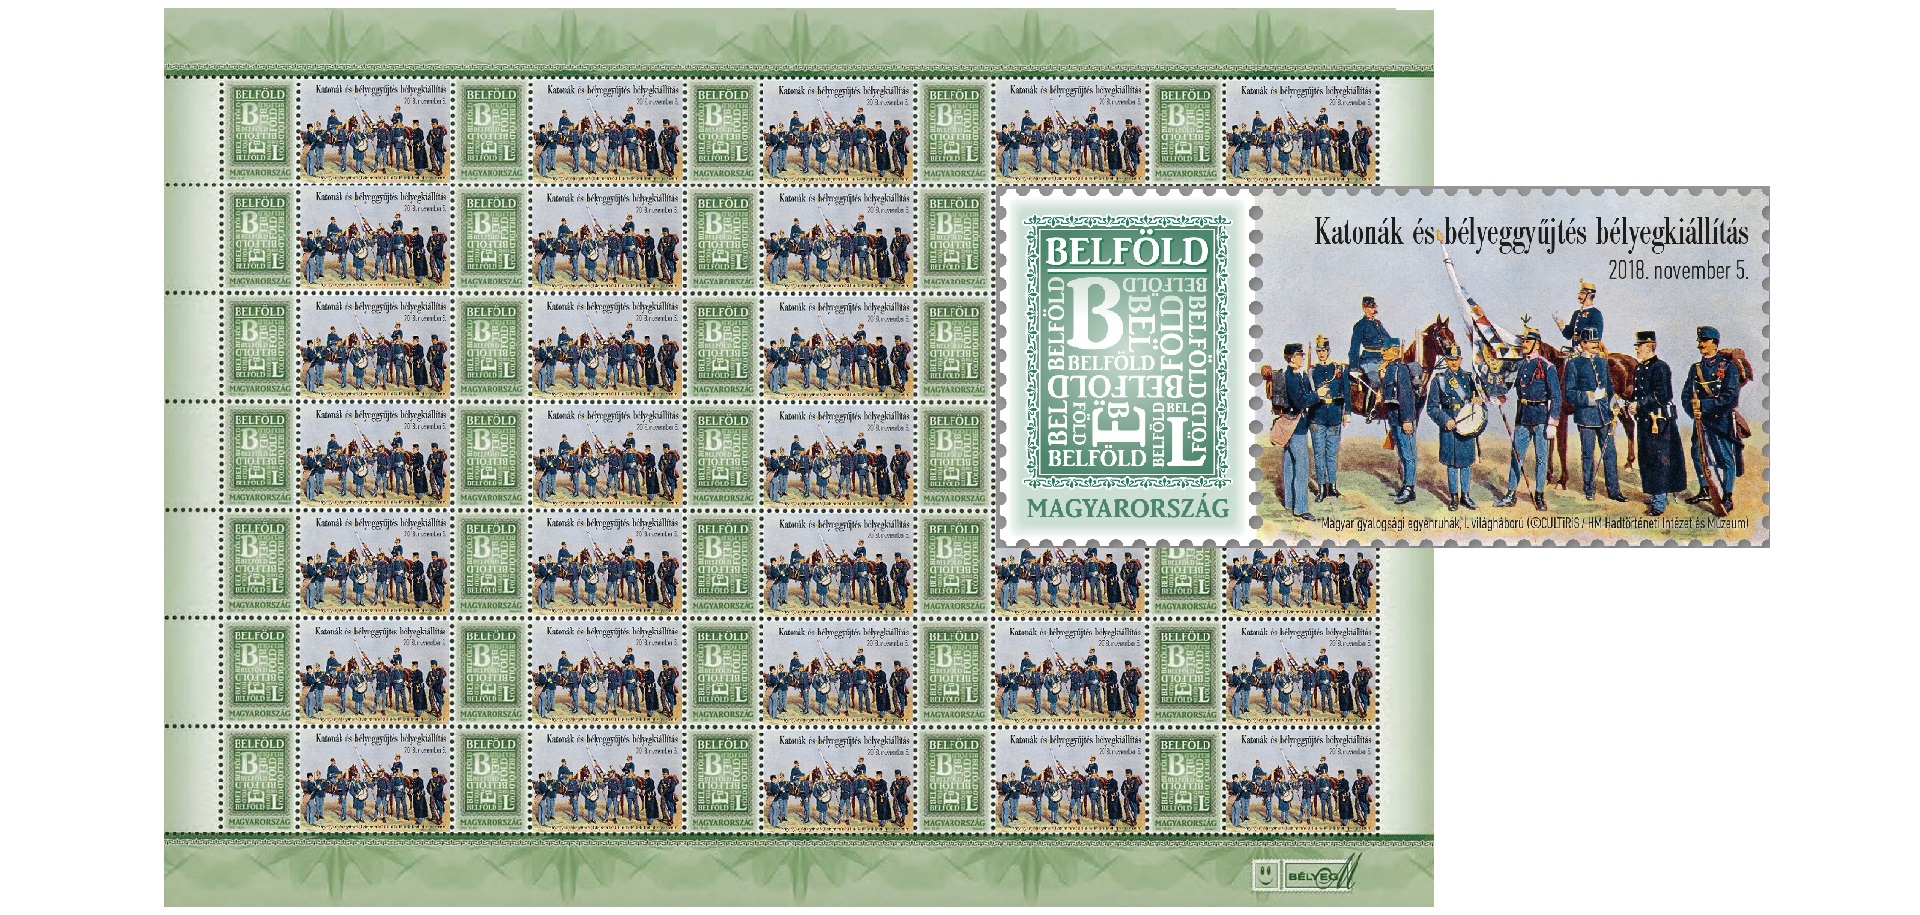 Magyar Posta Ltd. Soldiers and Stamp Collection